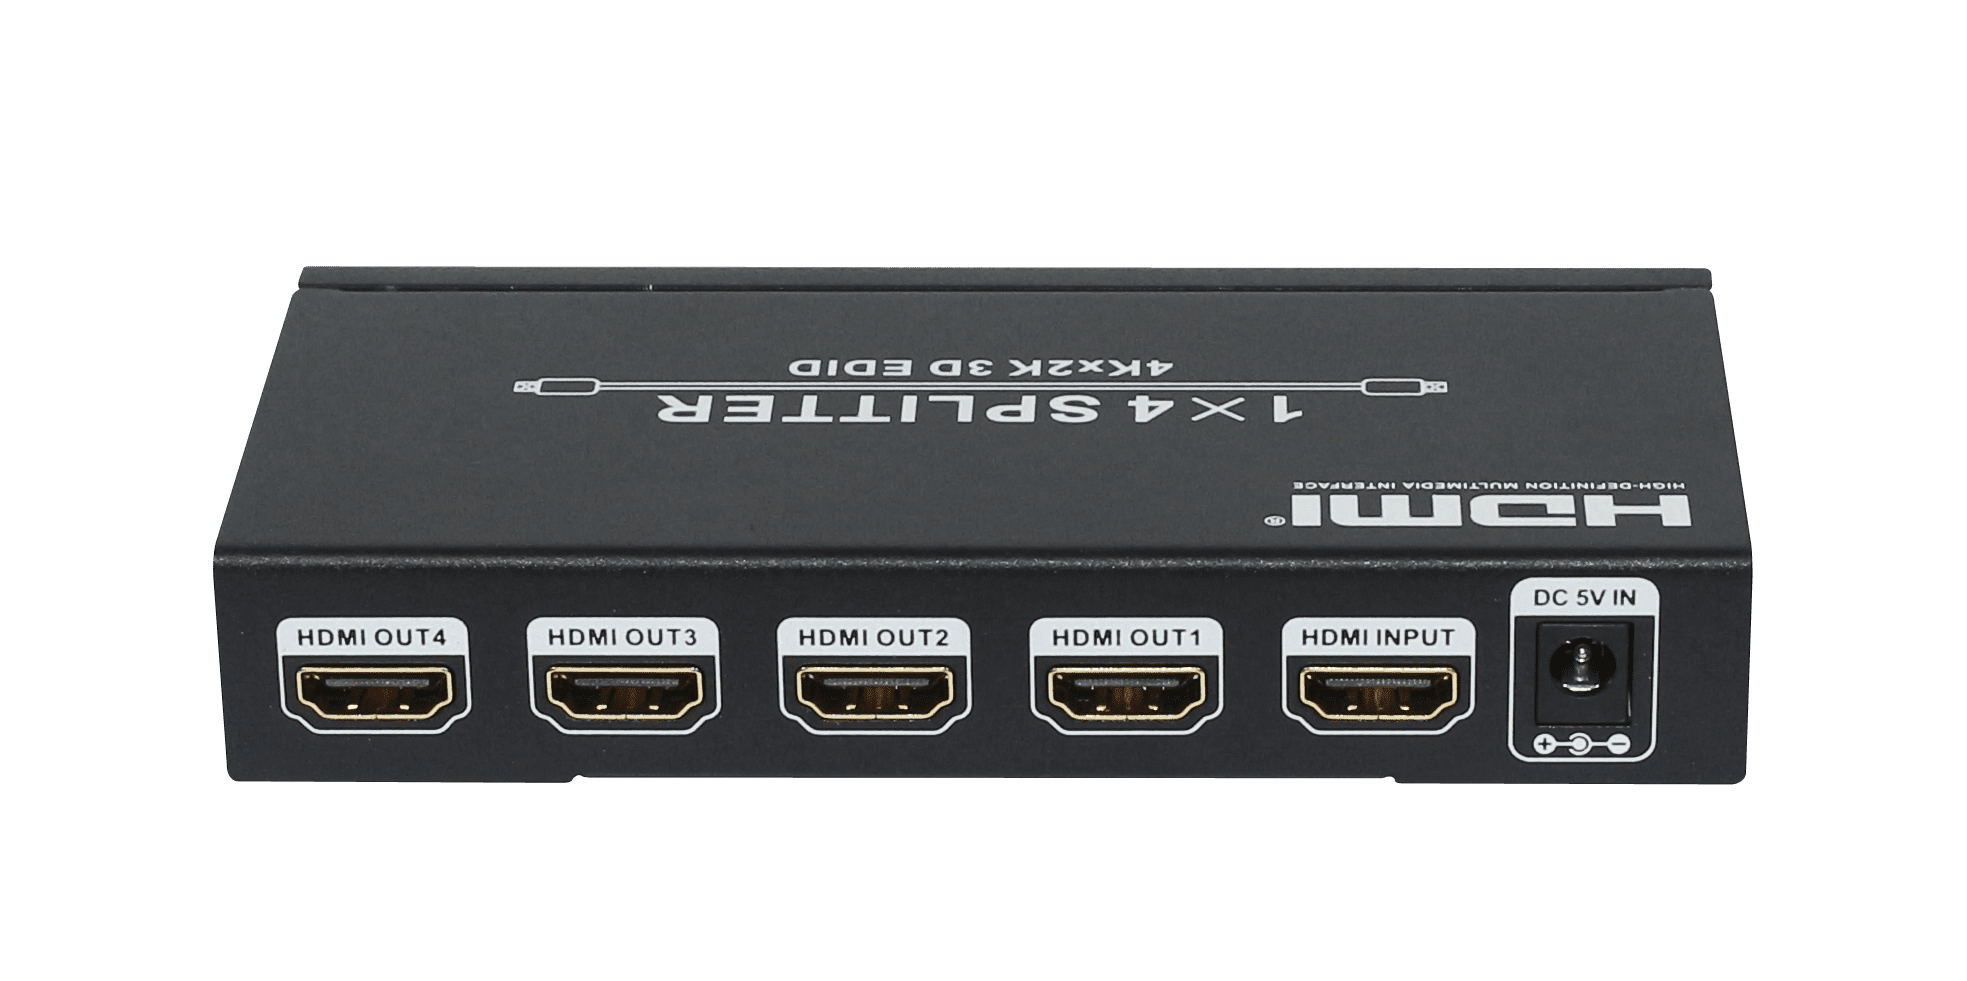 hdcvt-1x4-hdmi-1.4-splitter-supports-hdcp1.4-and-edid-2-image